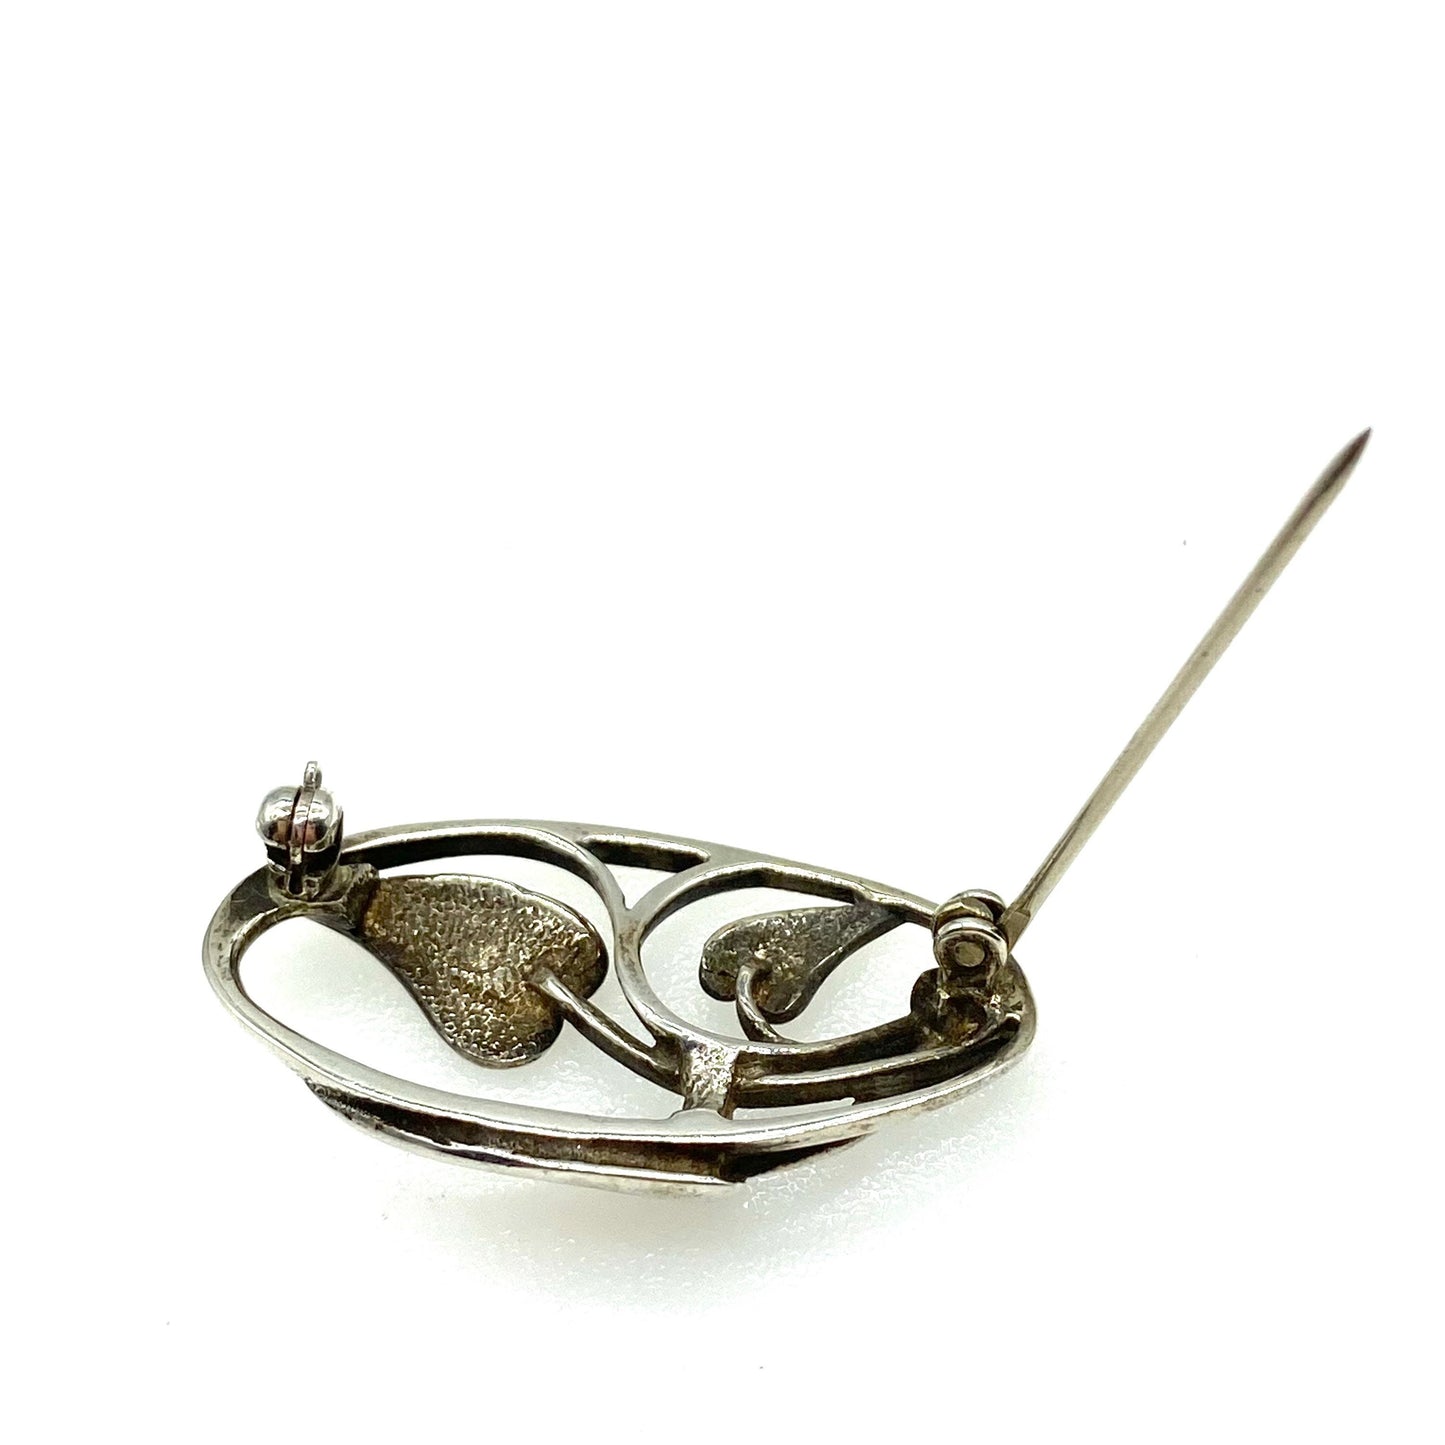 Ola M Gorie Sterling Silver Open Work Art Nouveau/Arts and Crafts Style Cecily Brooch